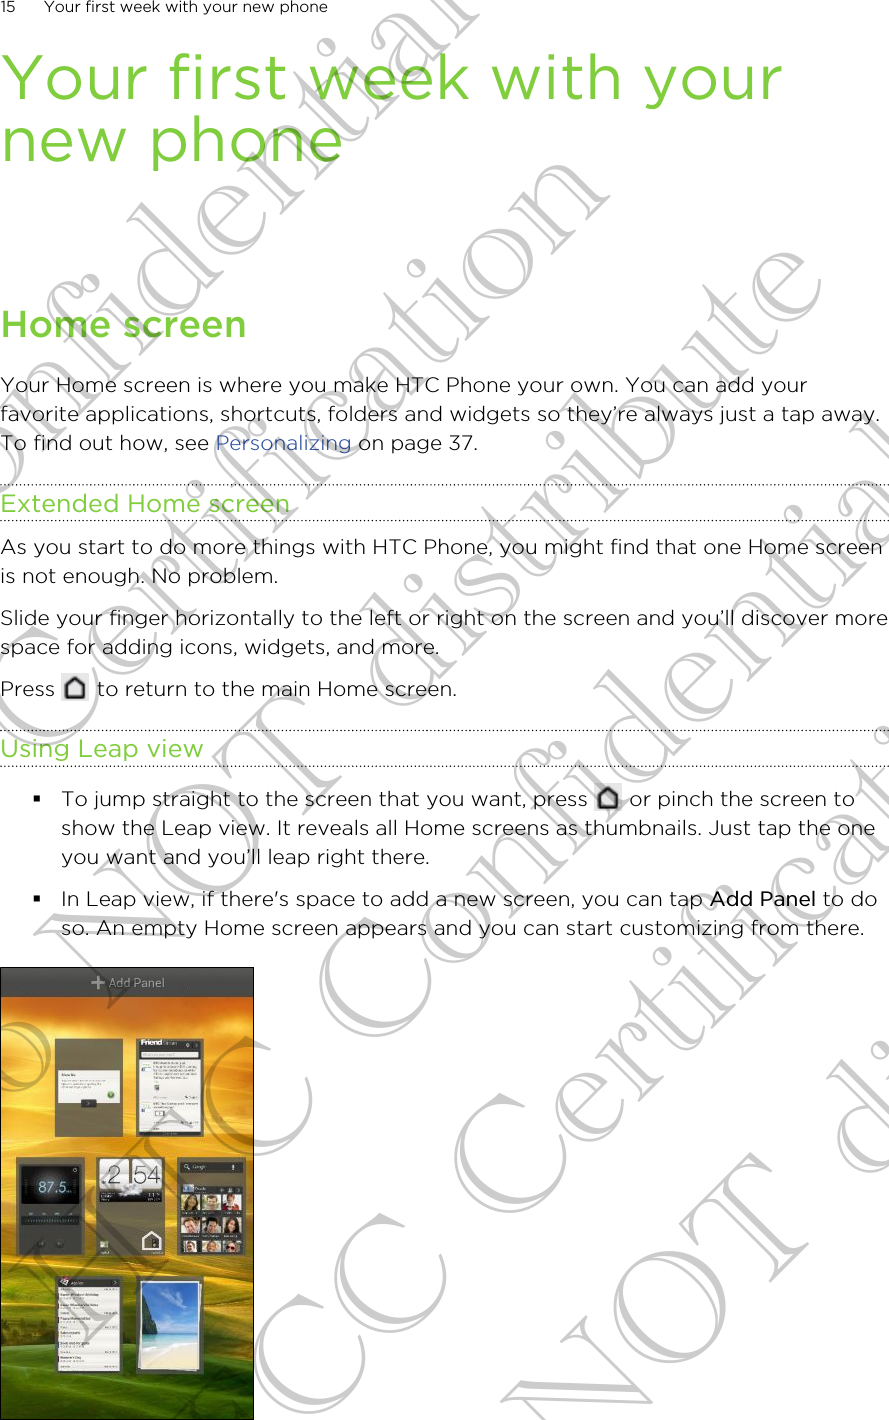 Your first week with yournew phoneHome screenYour Home screen is where you make HTC Phone your own. You can add yourfavorite applications, shortcuts, folders and widgets so they’re always just a tap away.To find out how, see Personalizing on page 37.Extended Home screenAs you start to do more things with HTC Phone, you might find that one Home screenis not enough. No problem.Slide your finger horizontally to the left or right on the screen and you’ll discover morespace for adding icons, widgets, and more.Press   to return to the main Home screen.Using Leap view§To jump straight to the screen that you want, press   or pinch the screen toshow the Leap view. It reveals all Home screens as thumbnails. Just tap the oneyou want and you’ll leap right there.§In Leap view, if there&apos;s space to add a new screen, you can tap Add Panel to doso. An empty Home screen appears and you can start customizing from there.15 Your first week with your new phoneHTC Confidential FCC Certification Do NOT distribute HTC Confidential FCC Certification Do NOT distribute